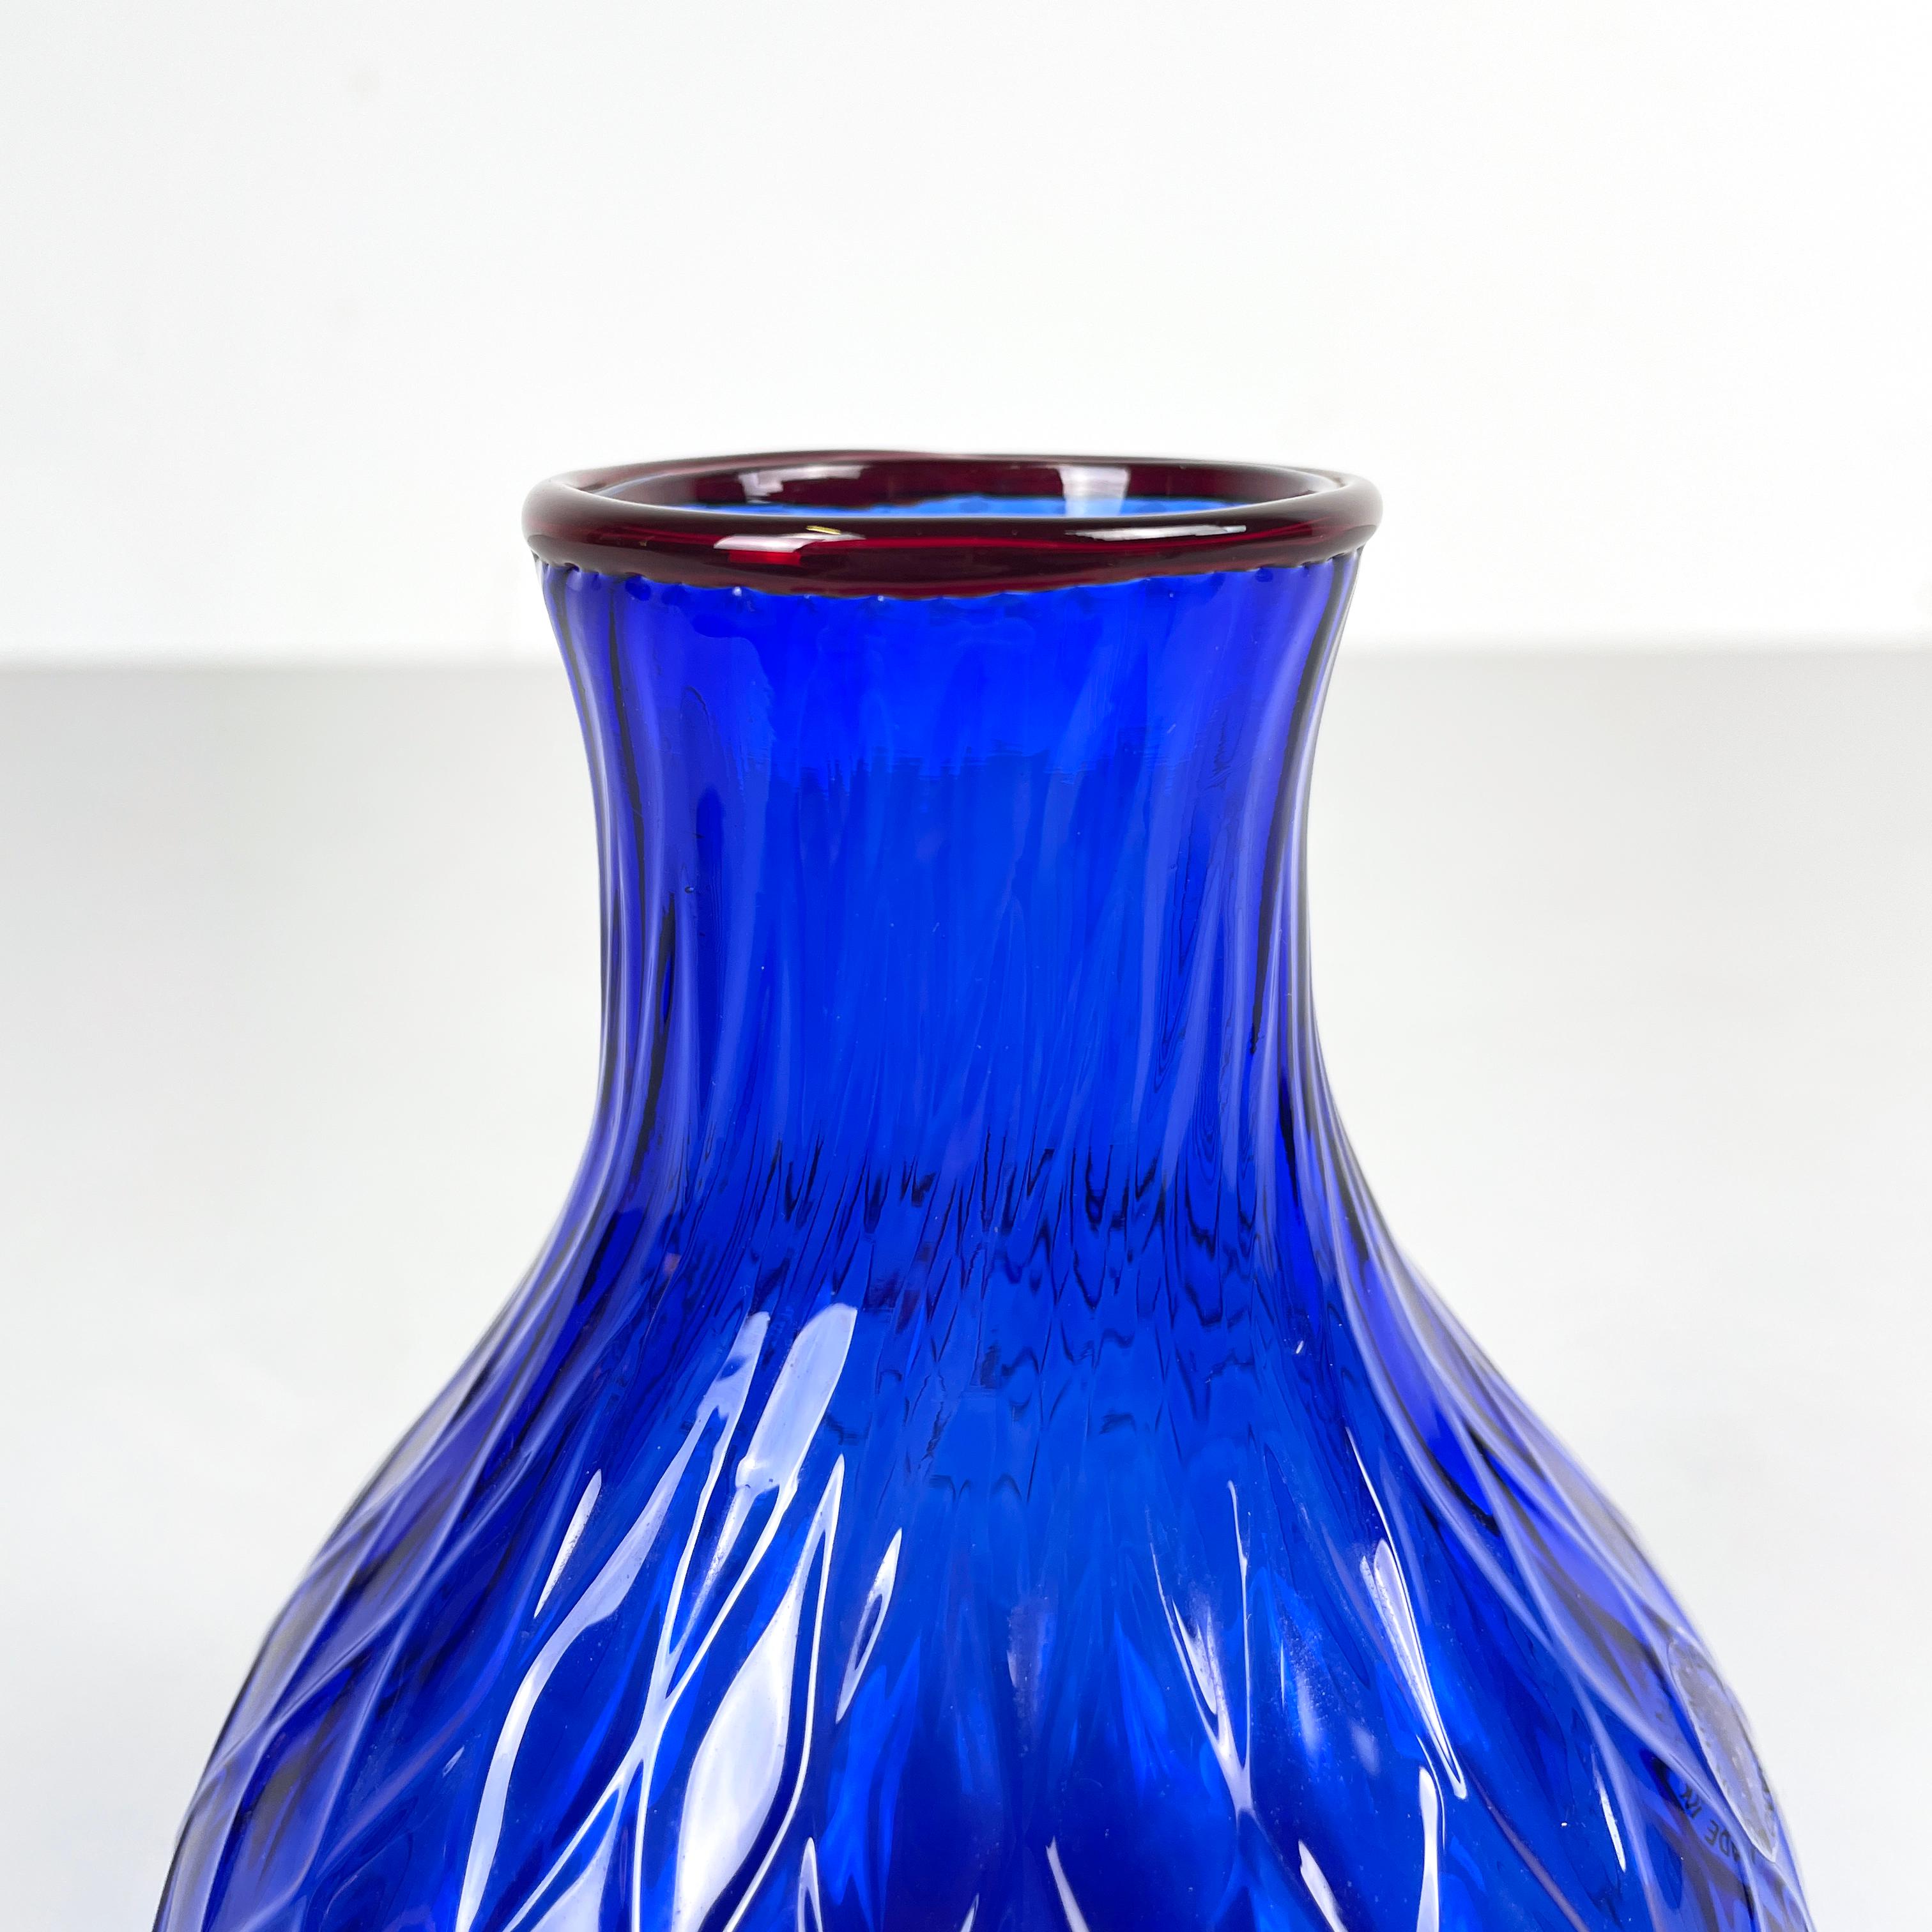 Late 20th Century Italian modern Round vase in red and blue Murano glass by Venini 1990s For Sale